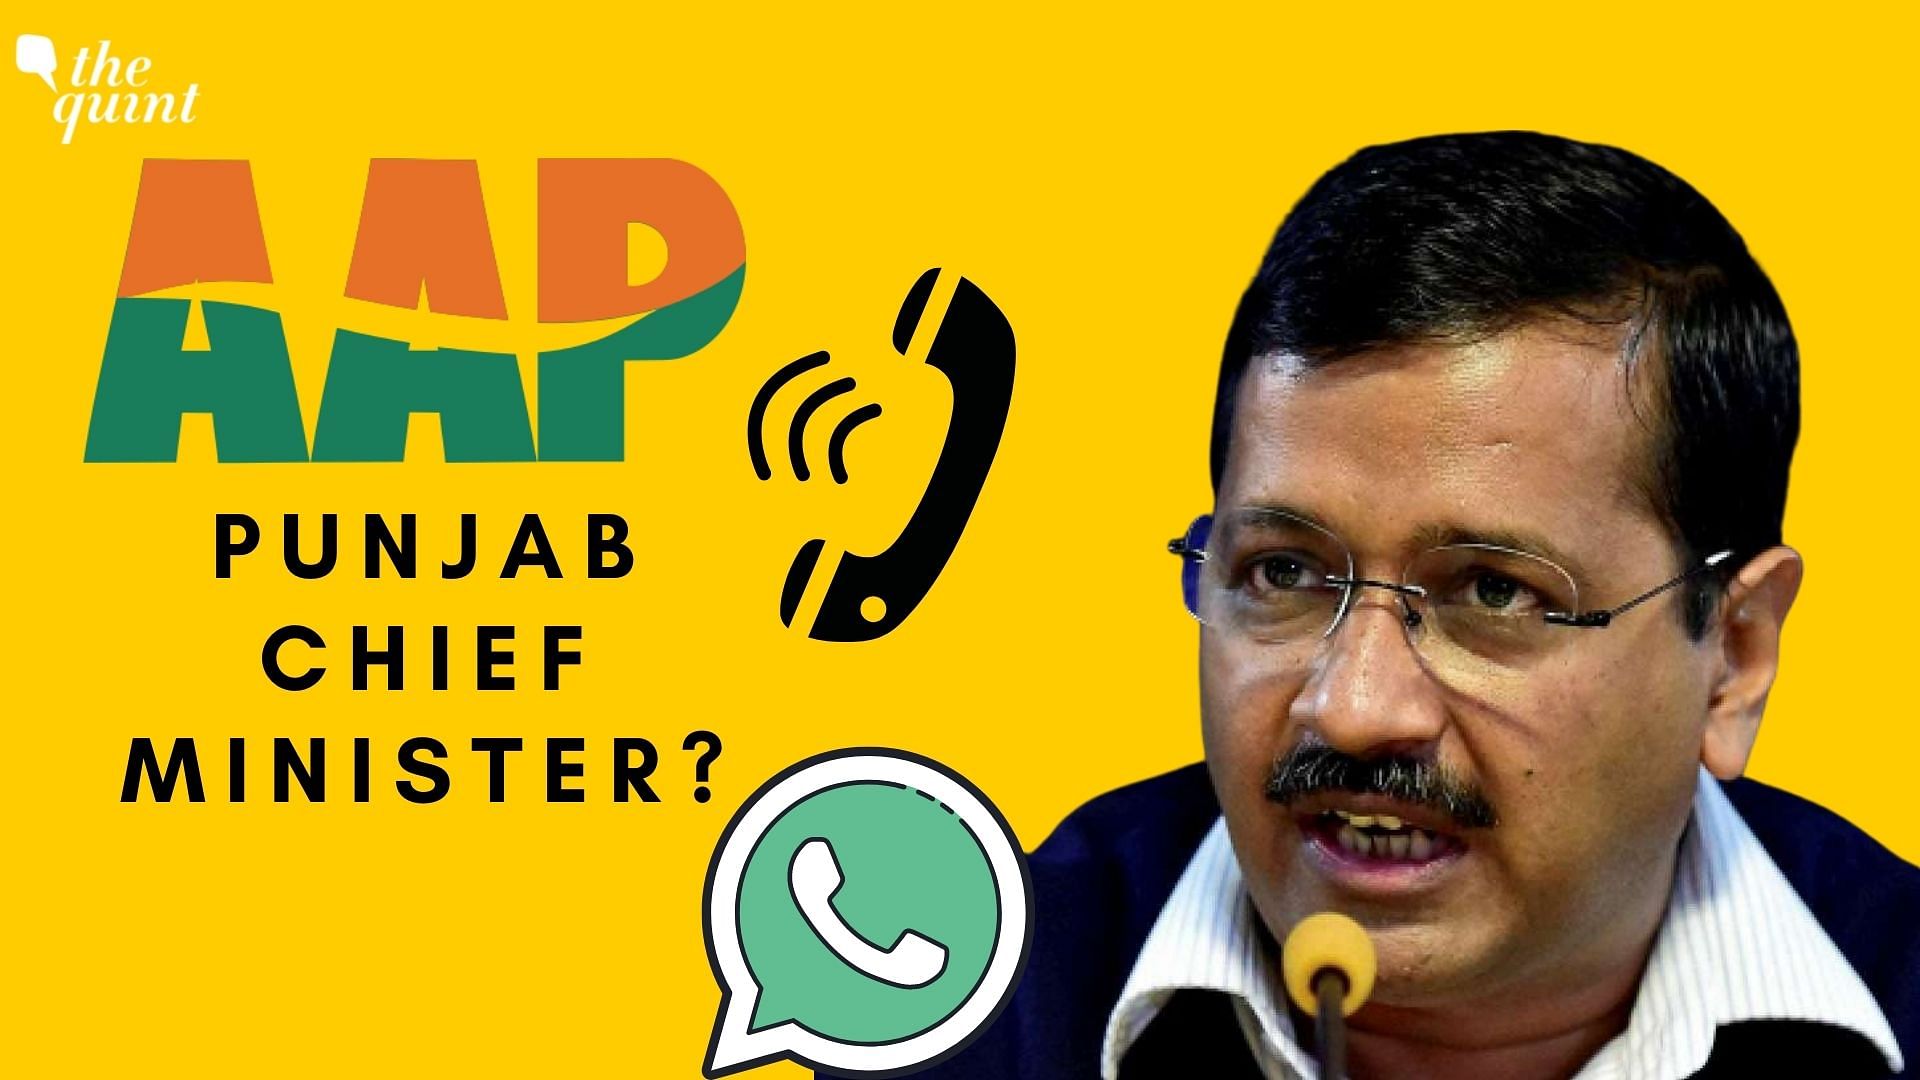 <div class="paragraphs"><p>Announcing a phone number, Kejriwal urged the people of Punjab to WhatsApp, SMS, or call on the number at any time until 5 pm on 17 January to state who they want AAP’s CM candidate to be.</p></div>